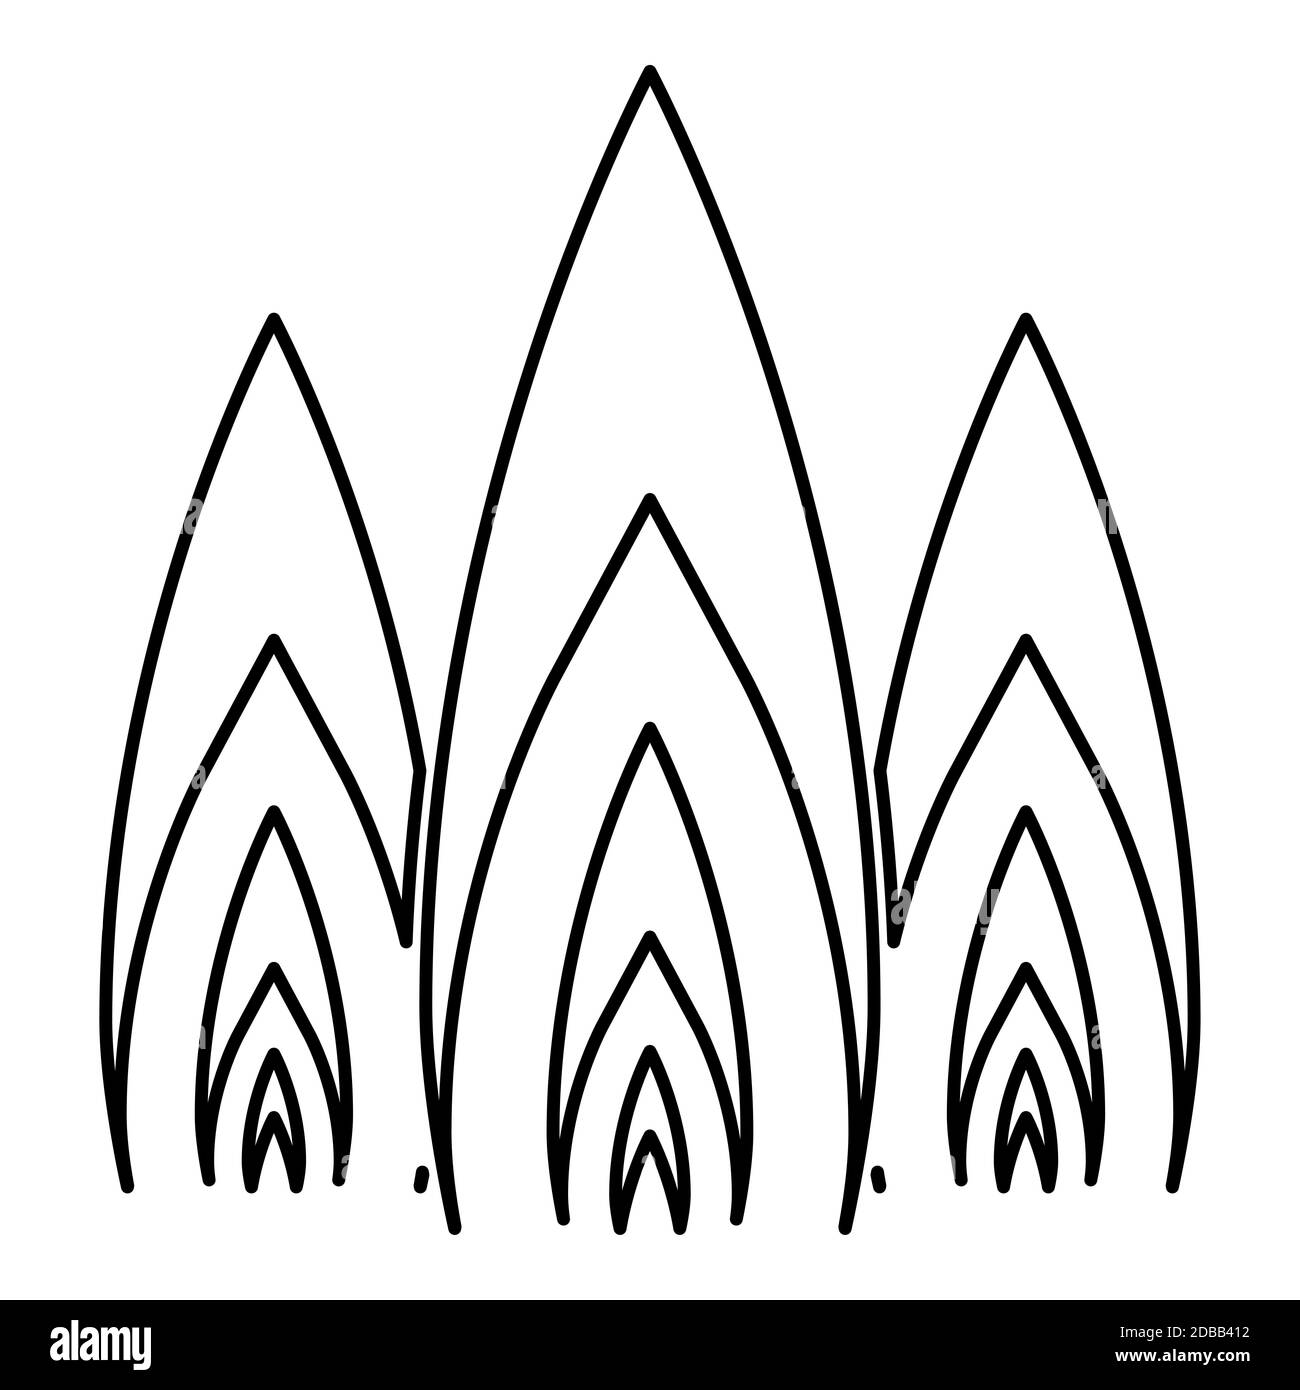 Three flame fire Burn bonfire 3 tongues icon outline black color vector illustration flat style simple image Stock Photo